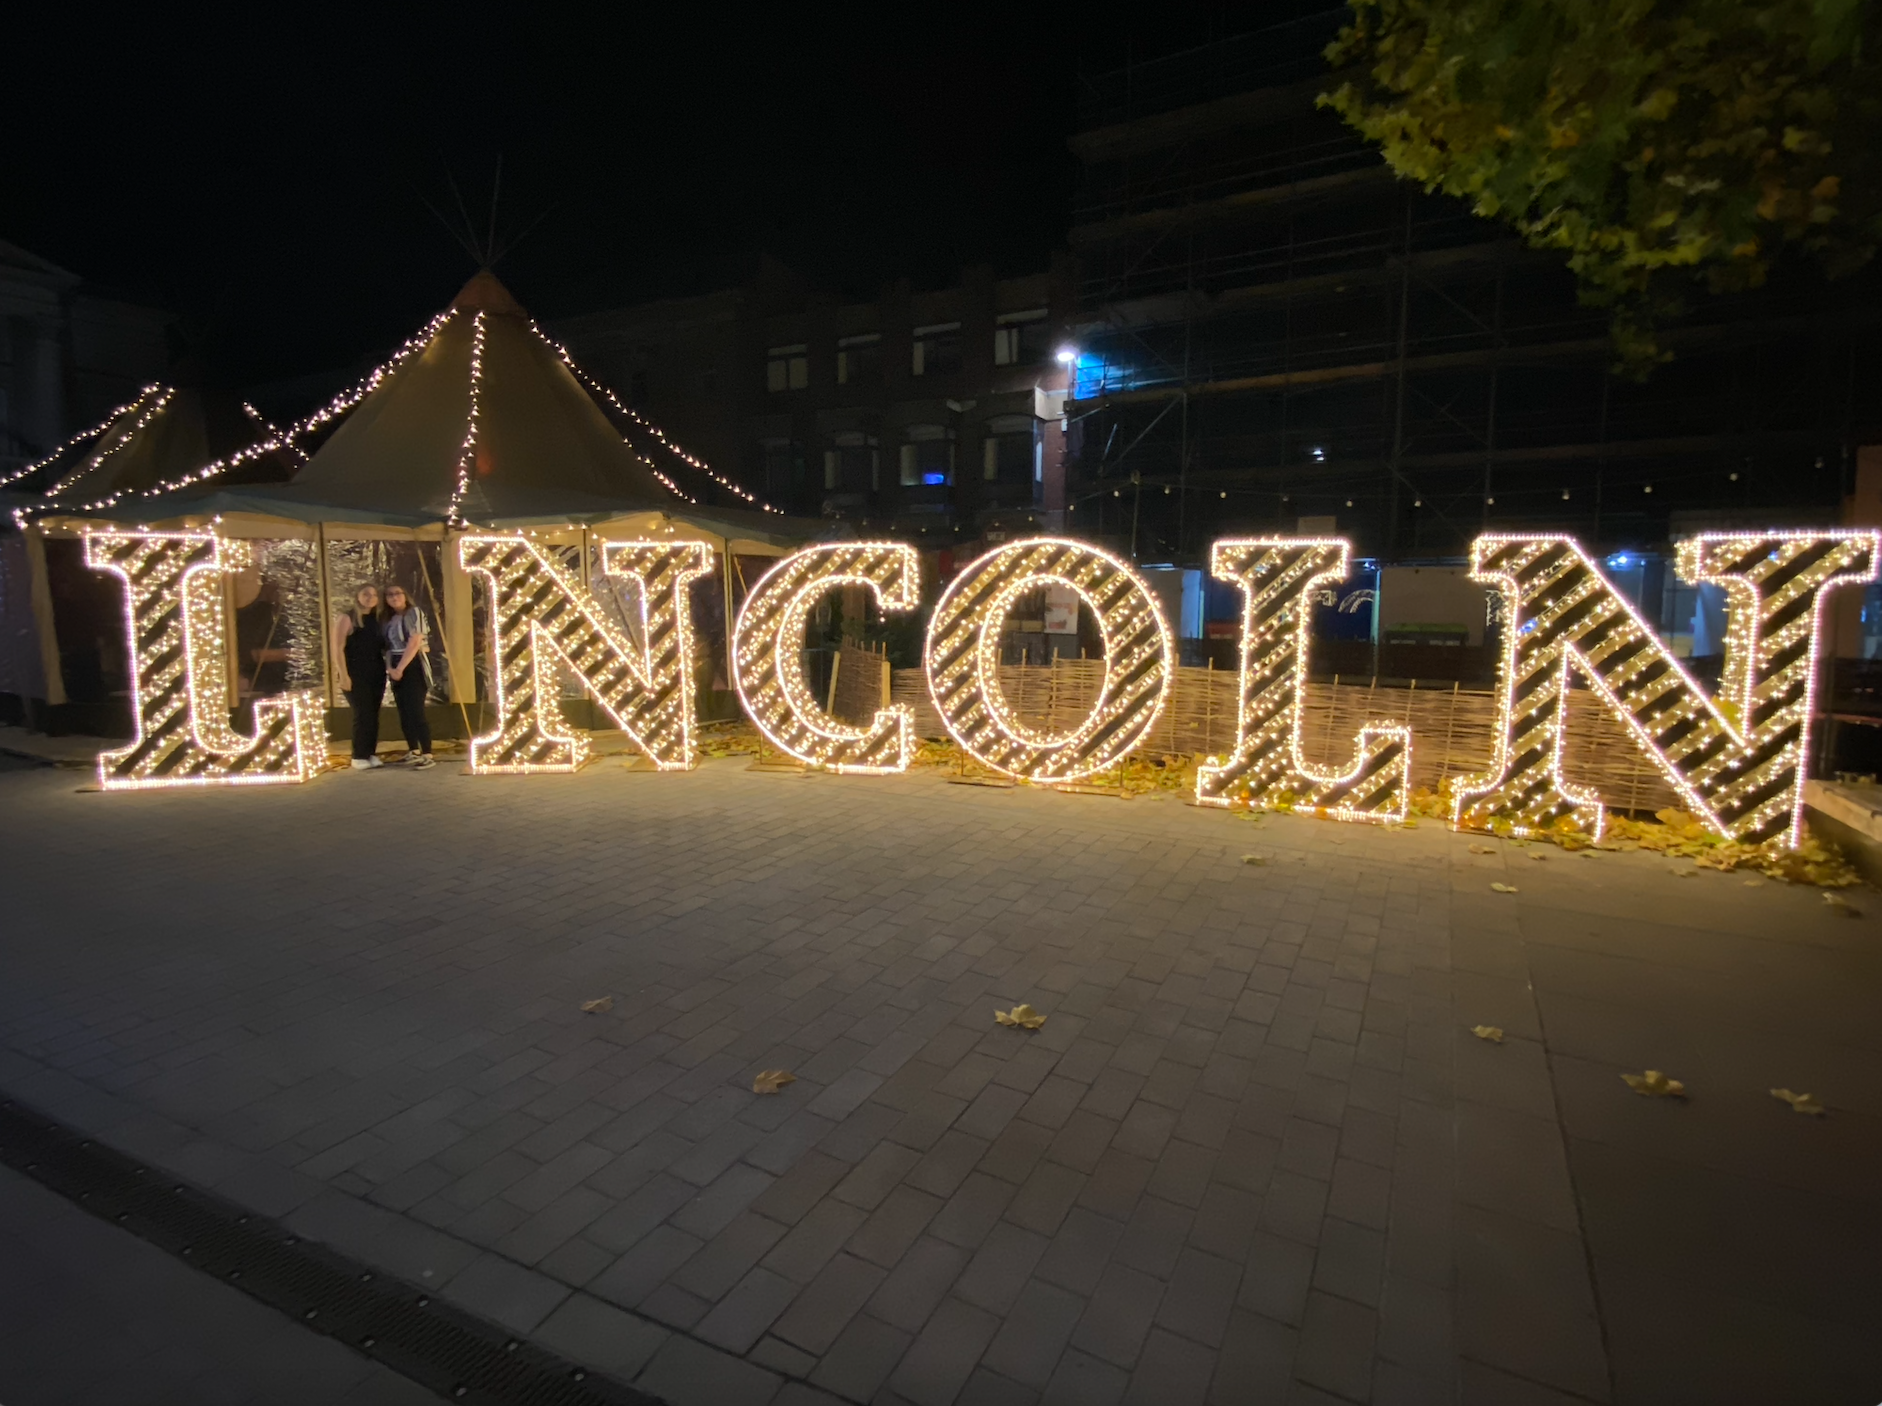 The Lincoln light up sign